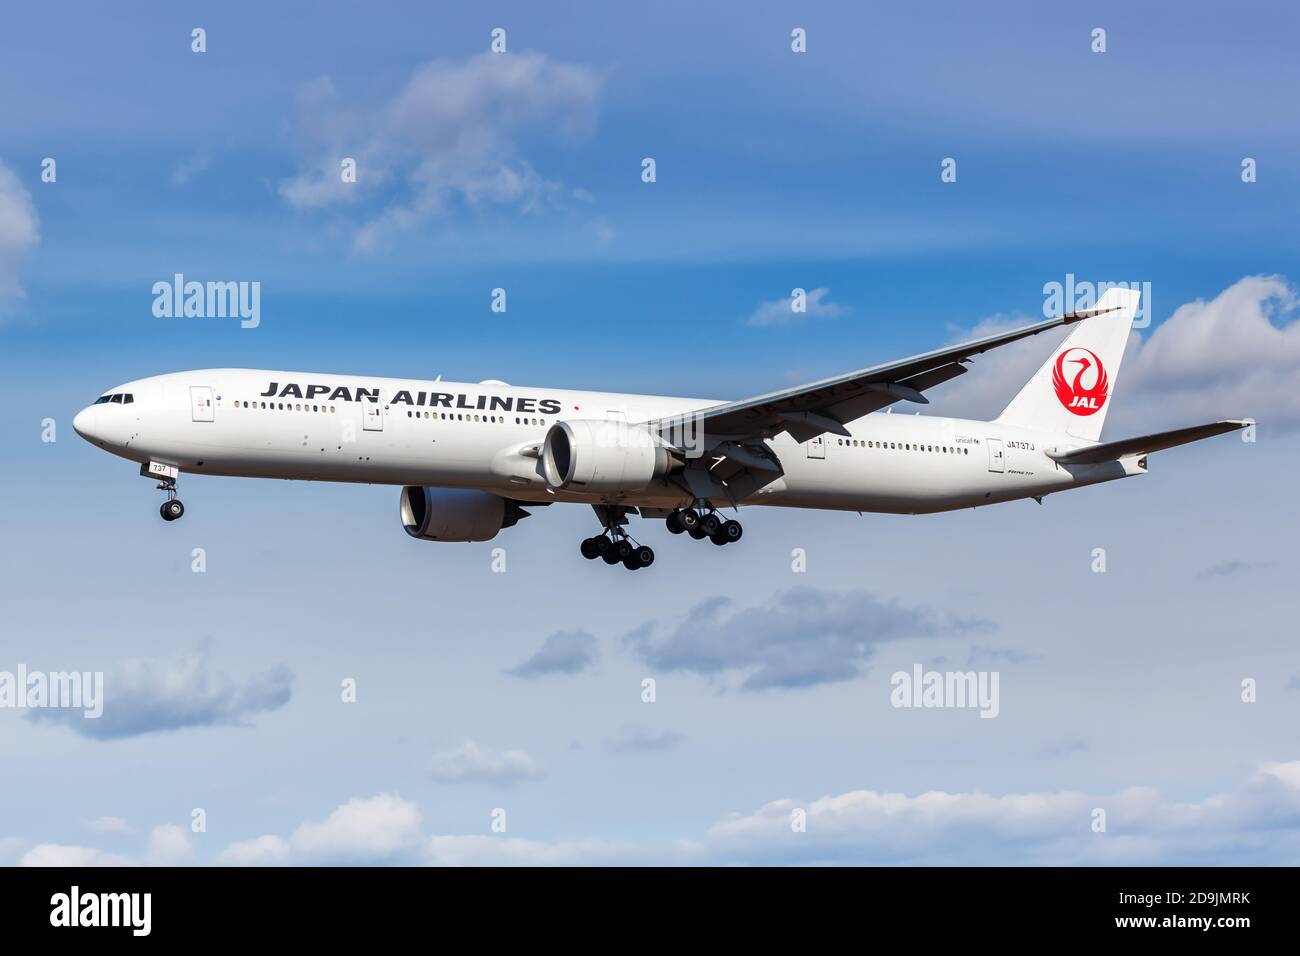 New York City, New York - February 29, 2020: Japan Airlines Boeing 777-300ER airplane at New York JFK Airport in the United States. Stock Photo